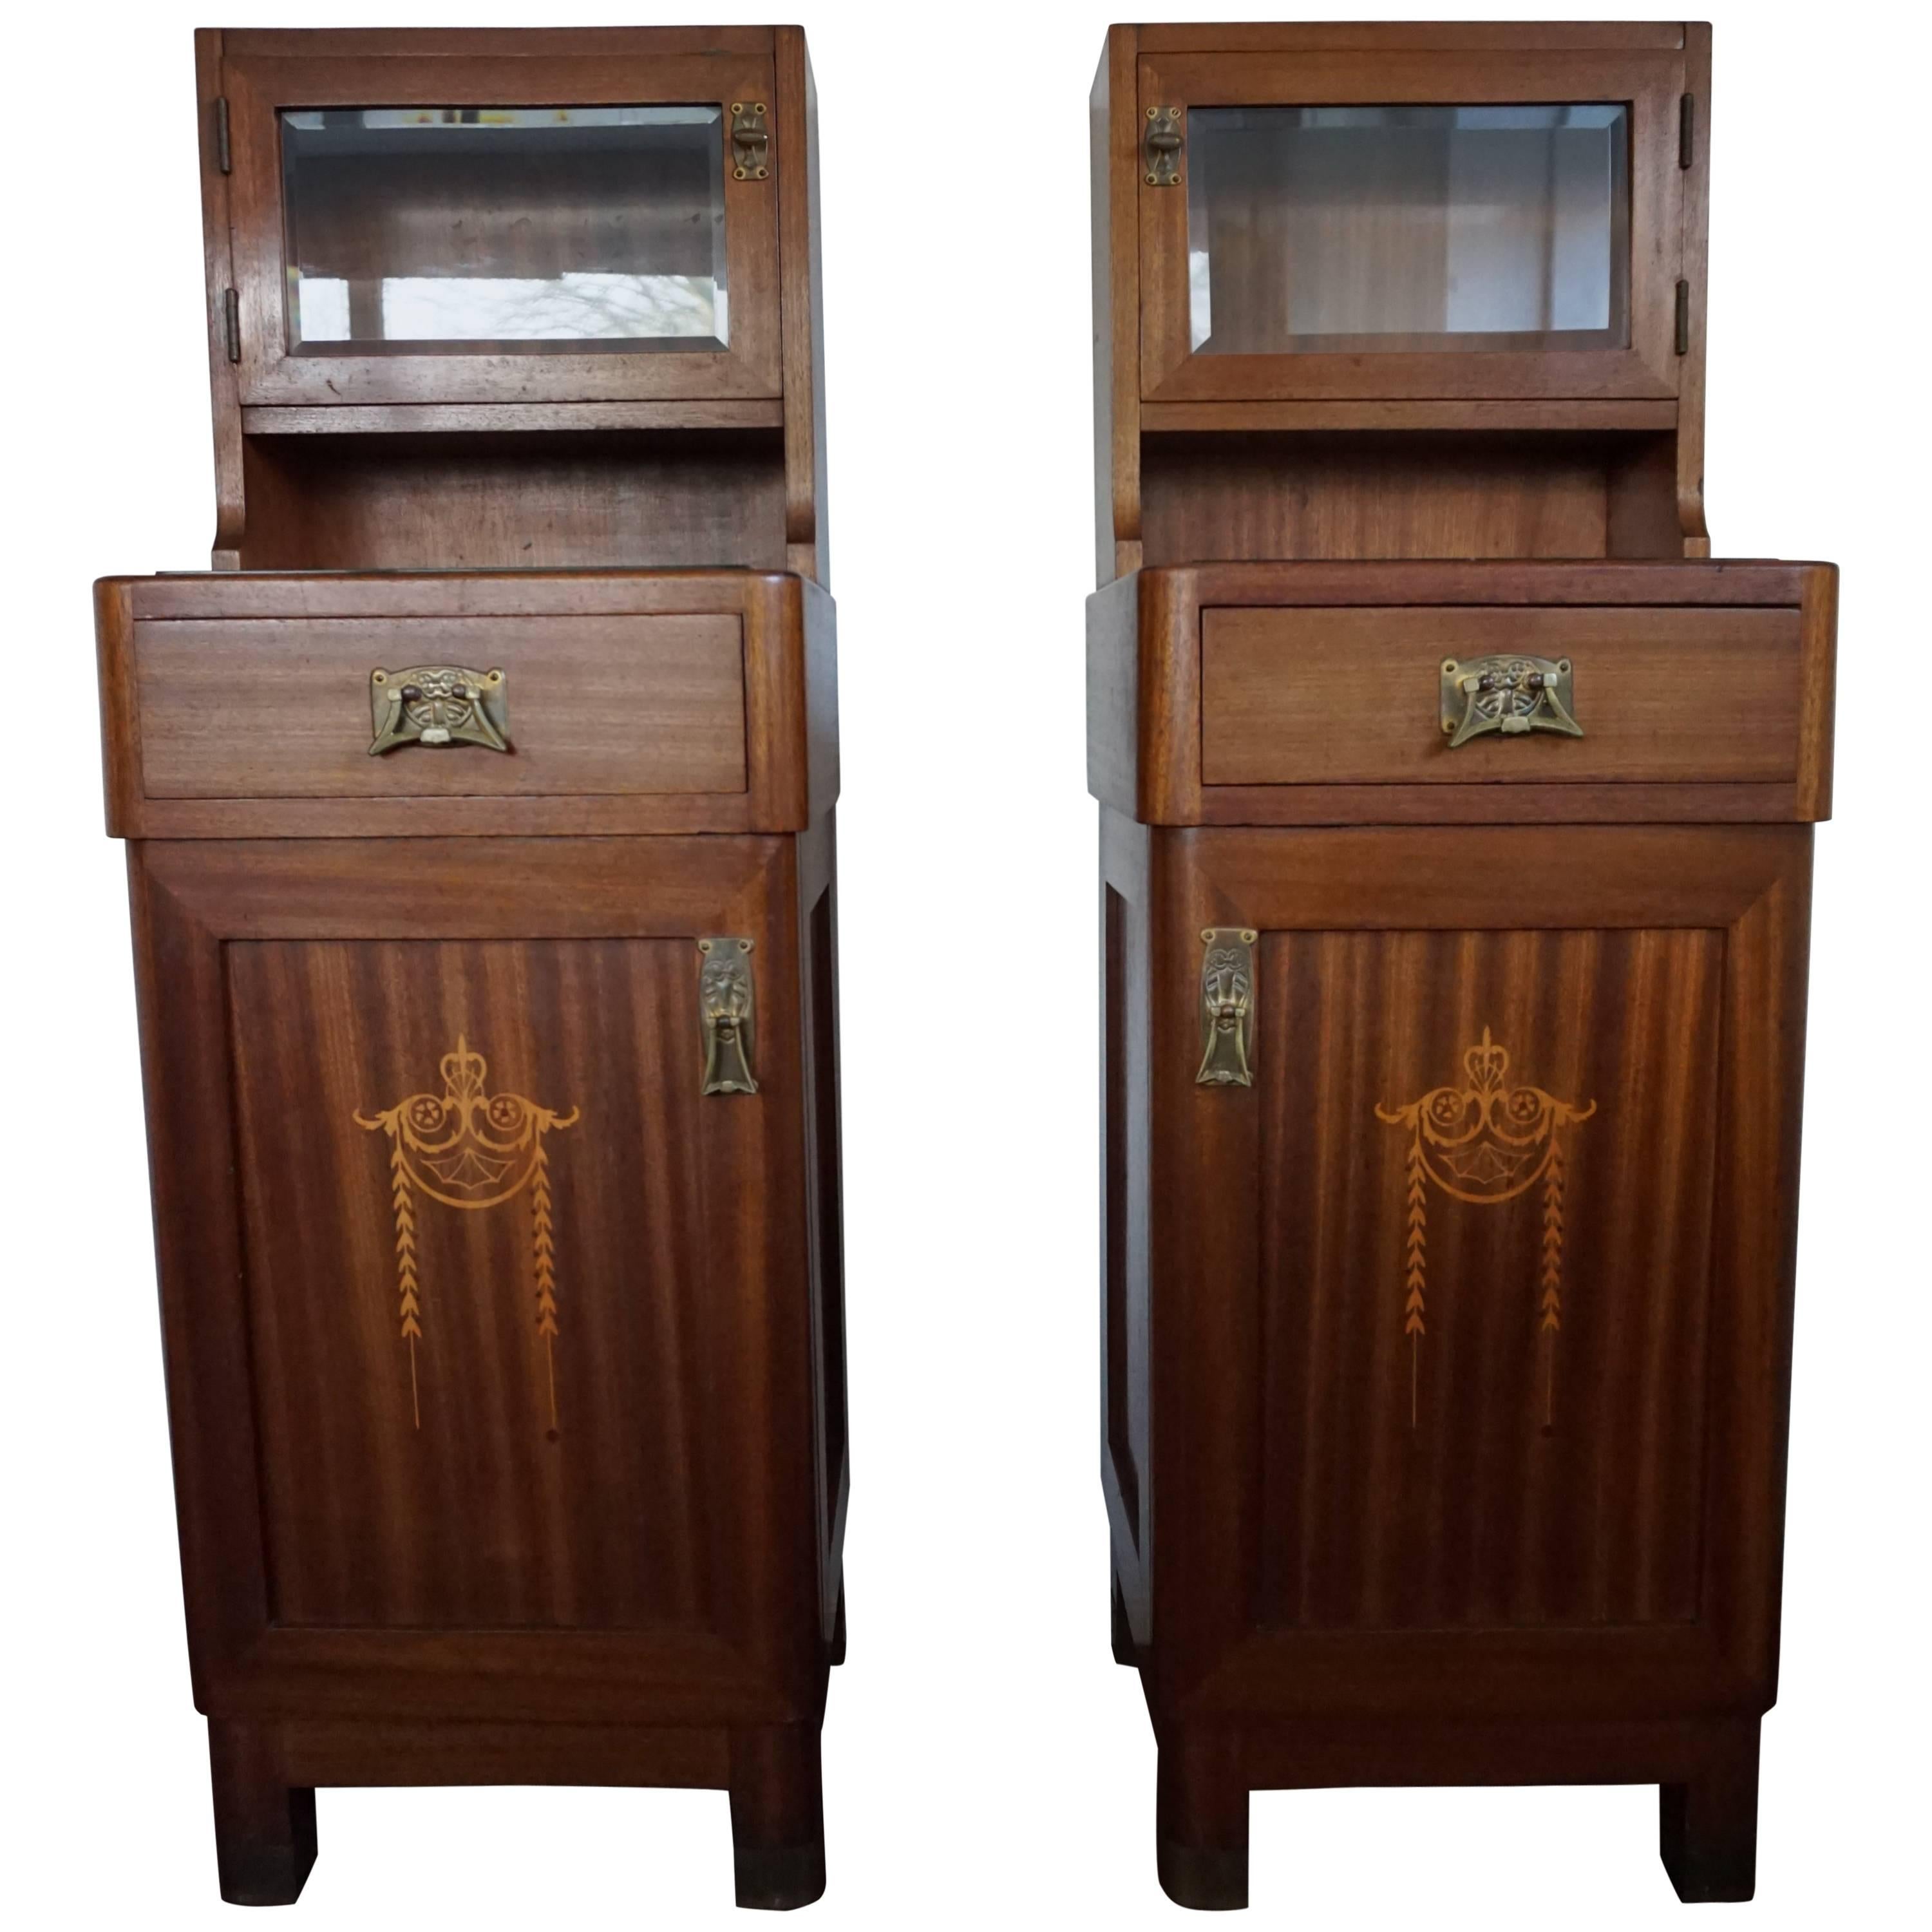 Wonderful Mahogany Art Nouveau Bedside Tables / Nightstands with Satinwood Inlay